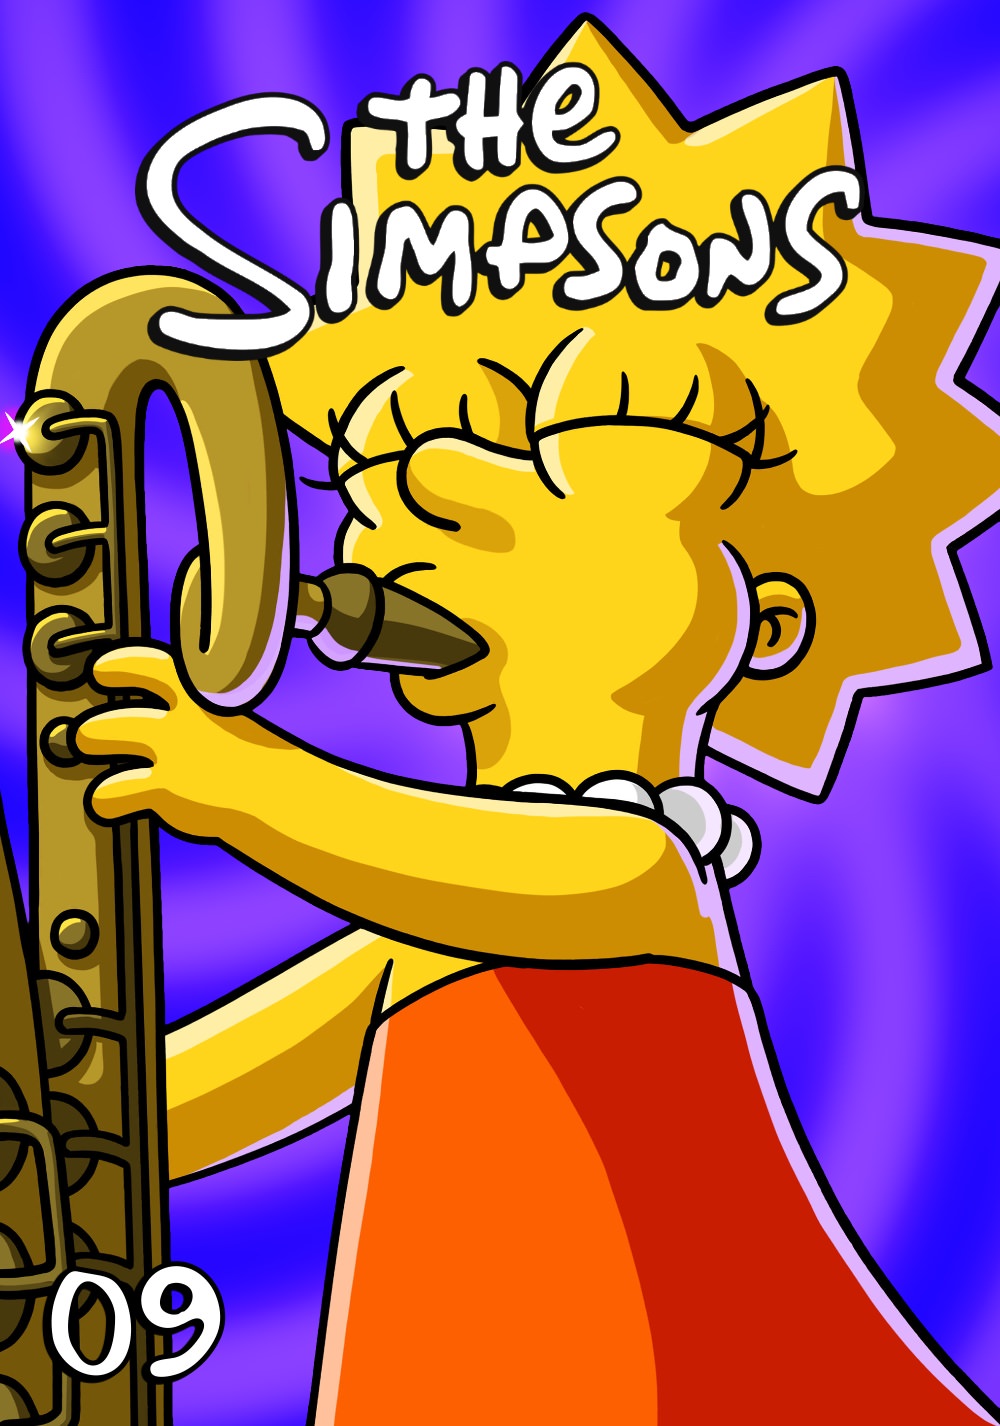 The Simpsons *Ultimate Collection* S09 (1997) BDRip 1080p HEVC 10-bit EAC3-5.1 MultiSub Retail